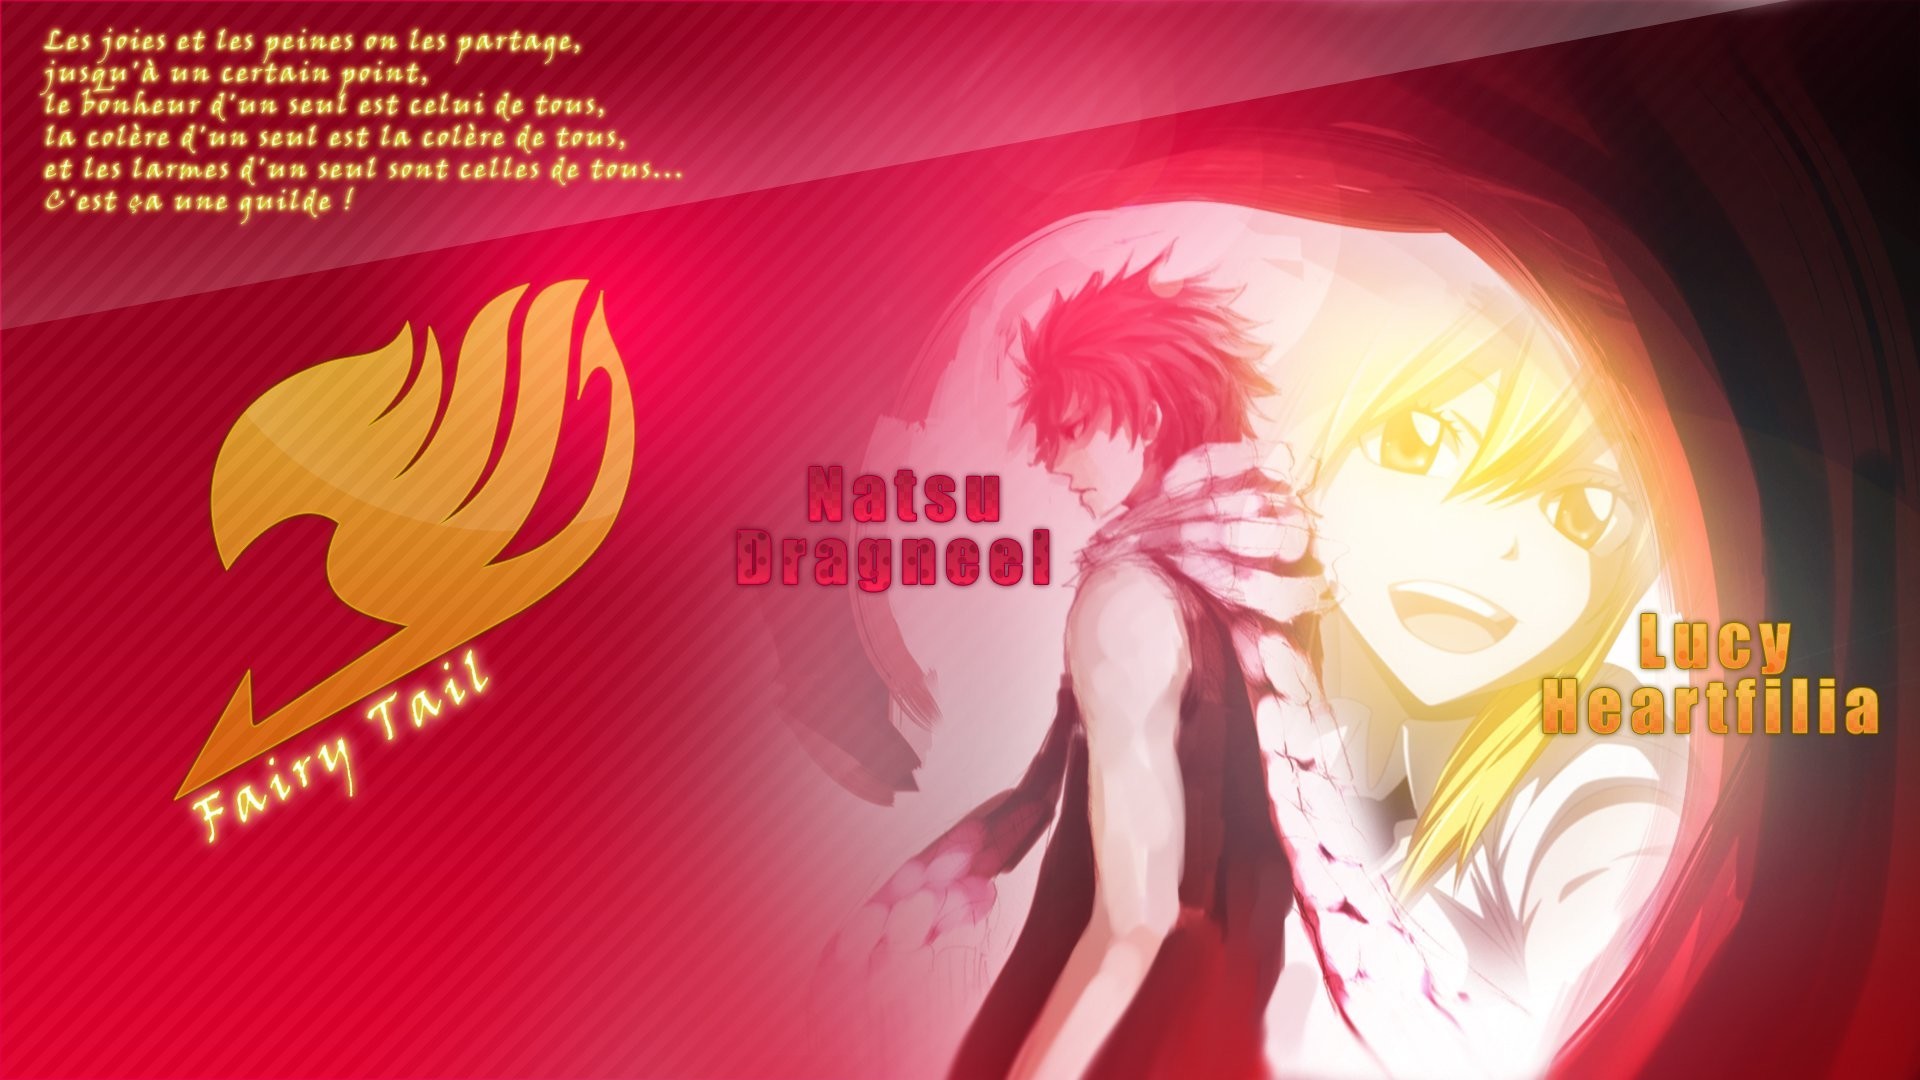 1920x1080 2880x1800 Fairy Tail Natsu And Lucy Wallpaper Desktop Background Is Cool  Wallpapers